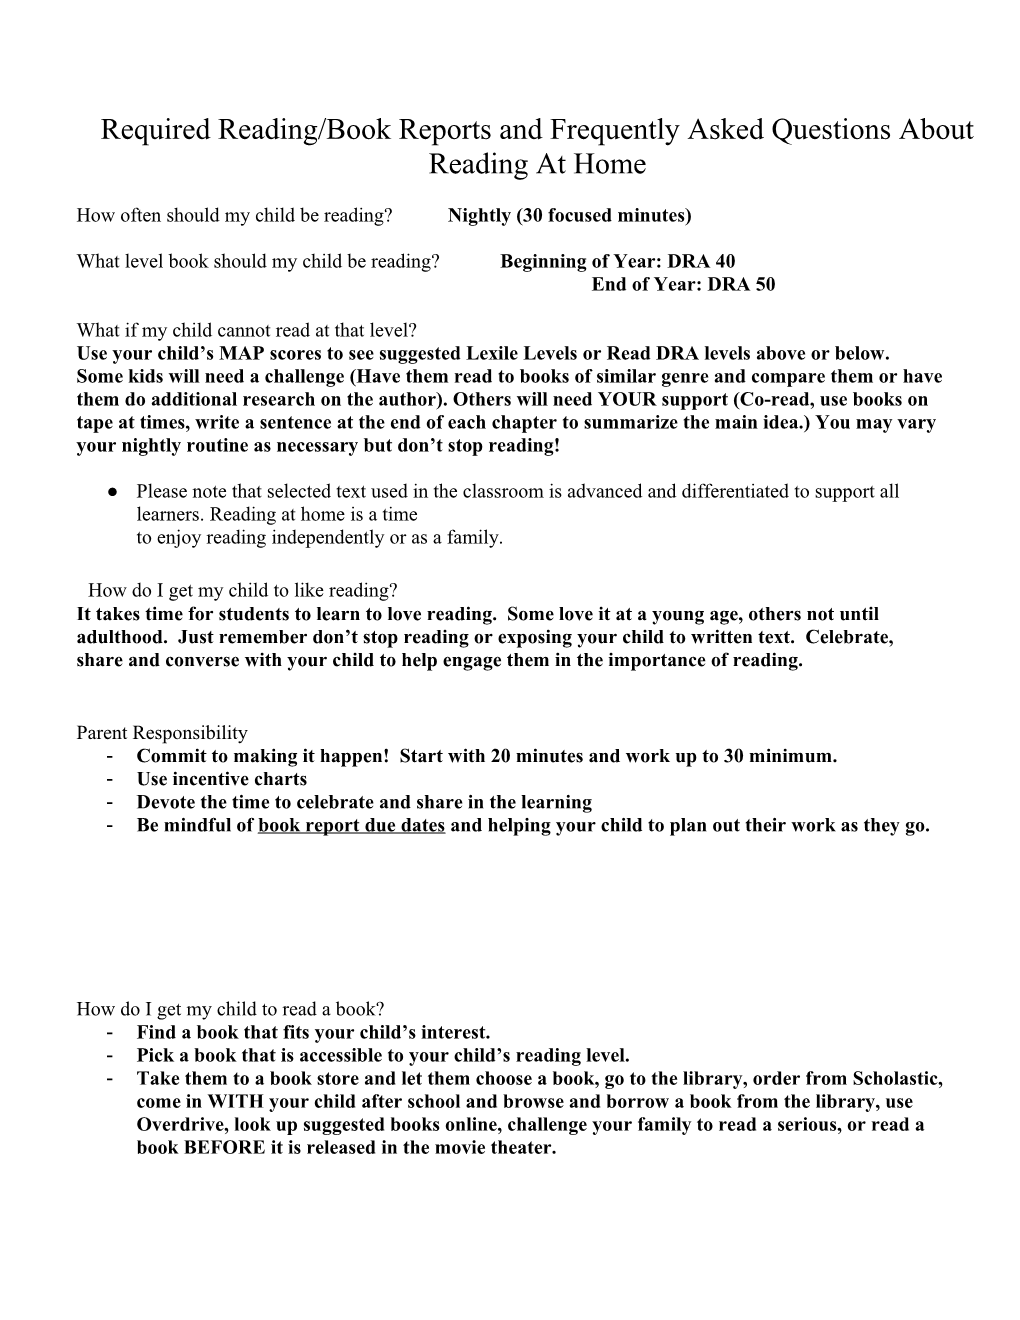 Required Reading/Book Reports and Frequently Asked Questions About Reading at Home